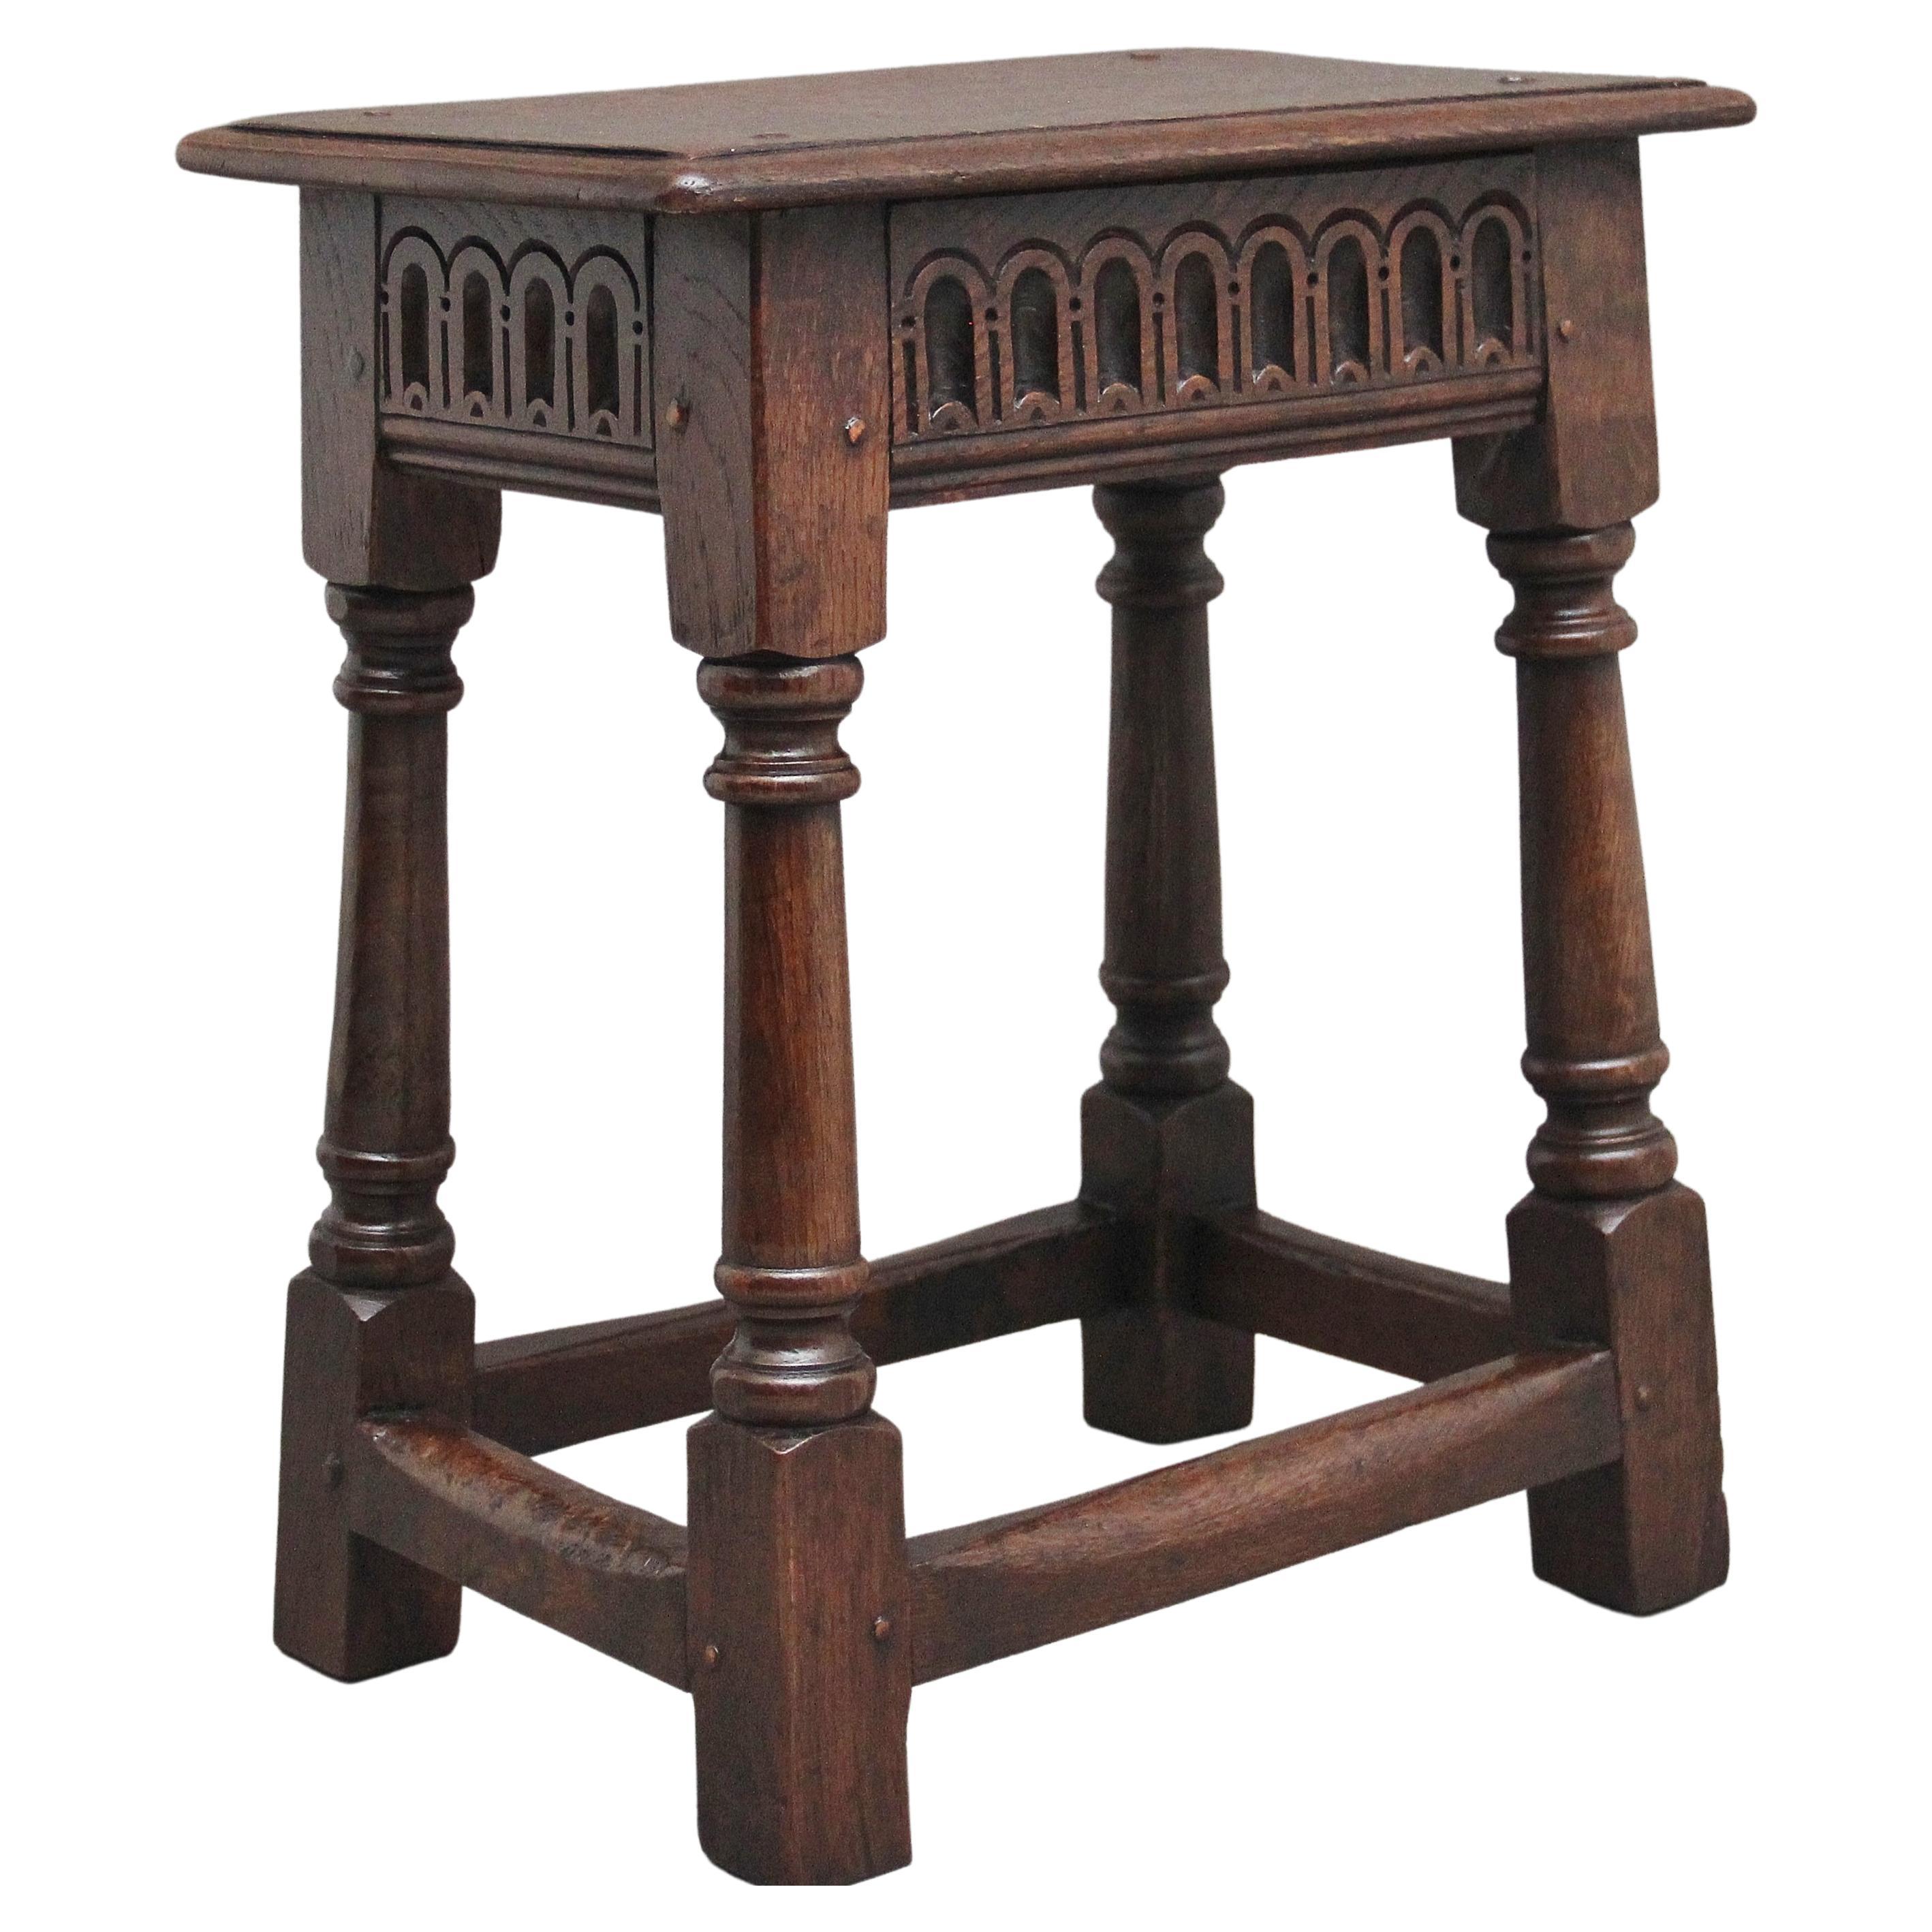 Early 20th Century oak joint stool in the 17th Century style